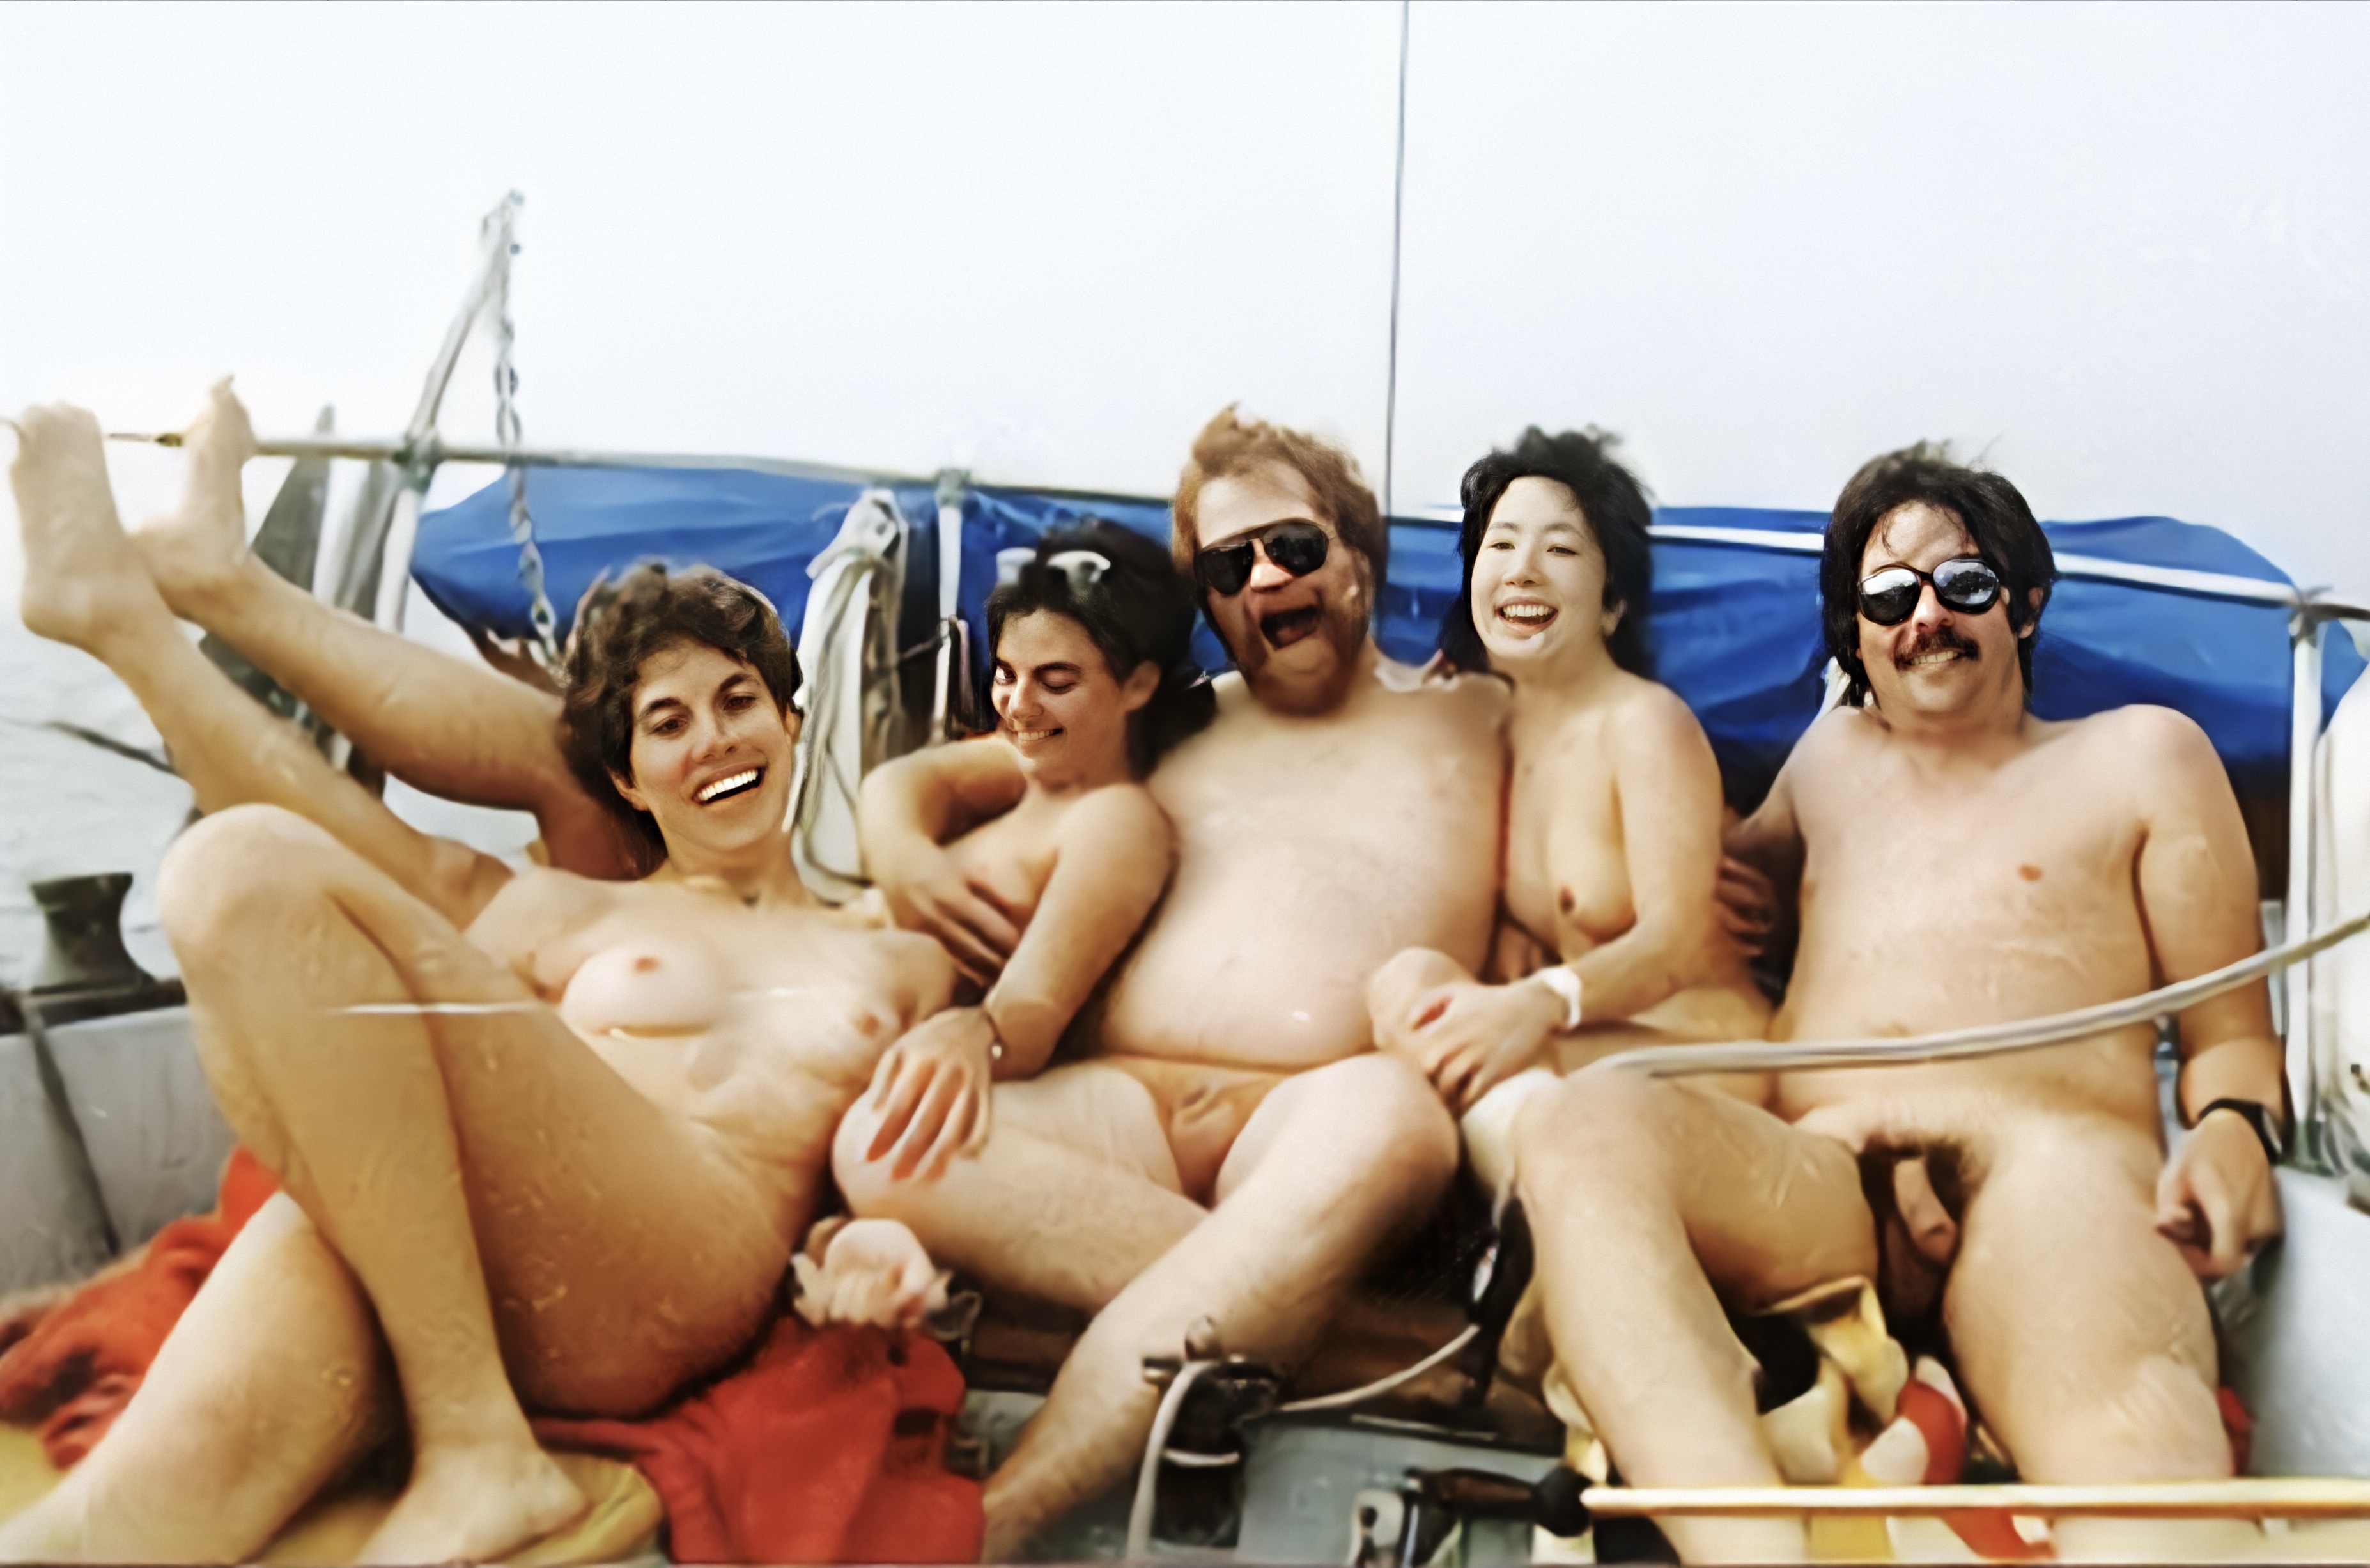 Group photo 2 naked sailing in the bay